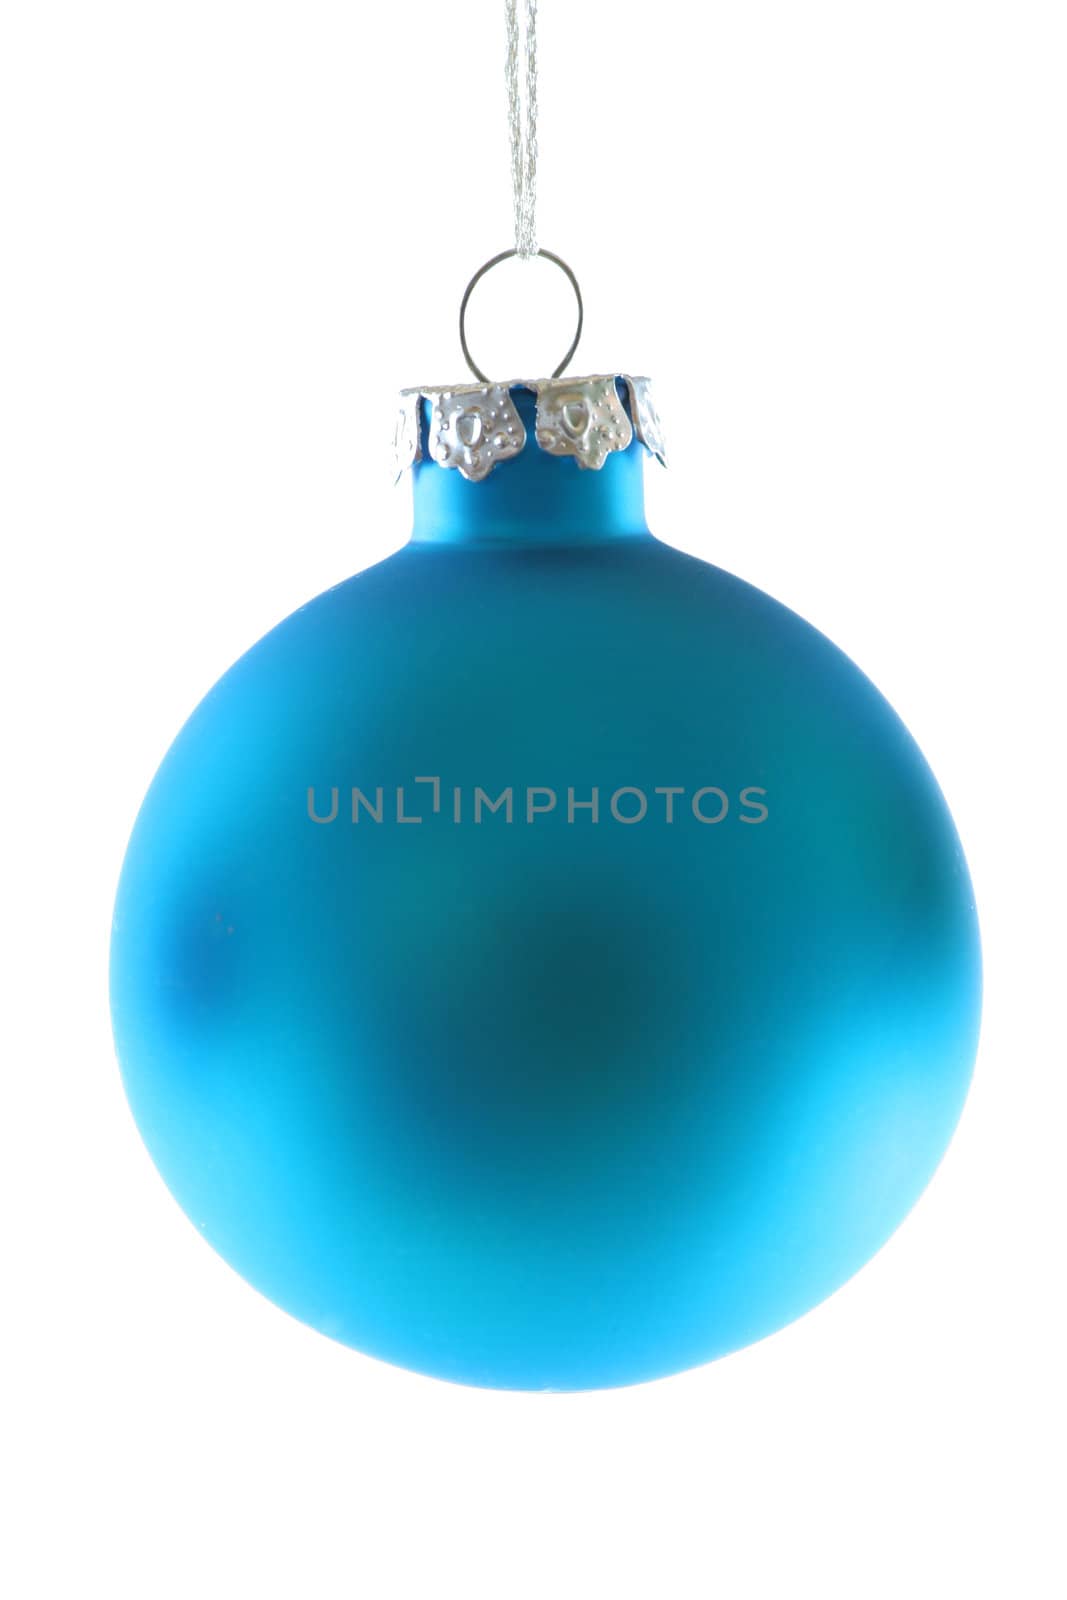 Sky Blue  ornament isolated on white background.